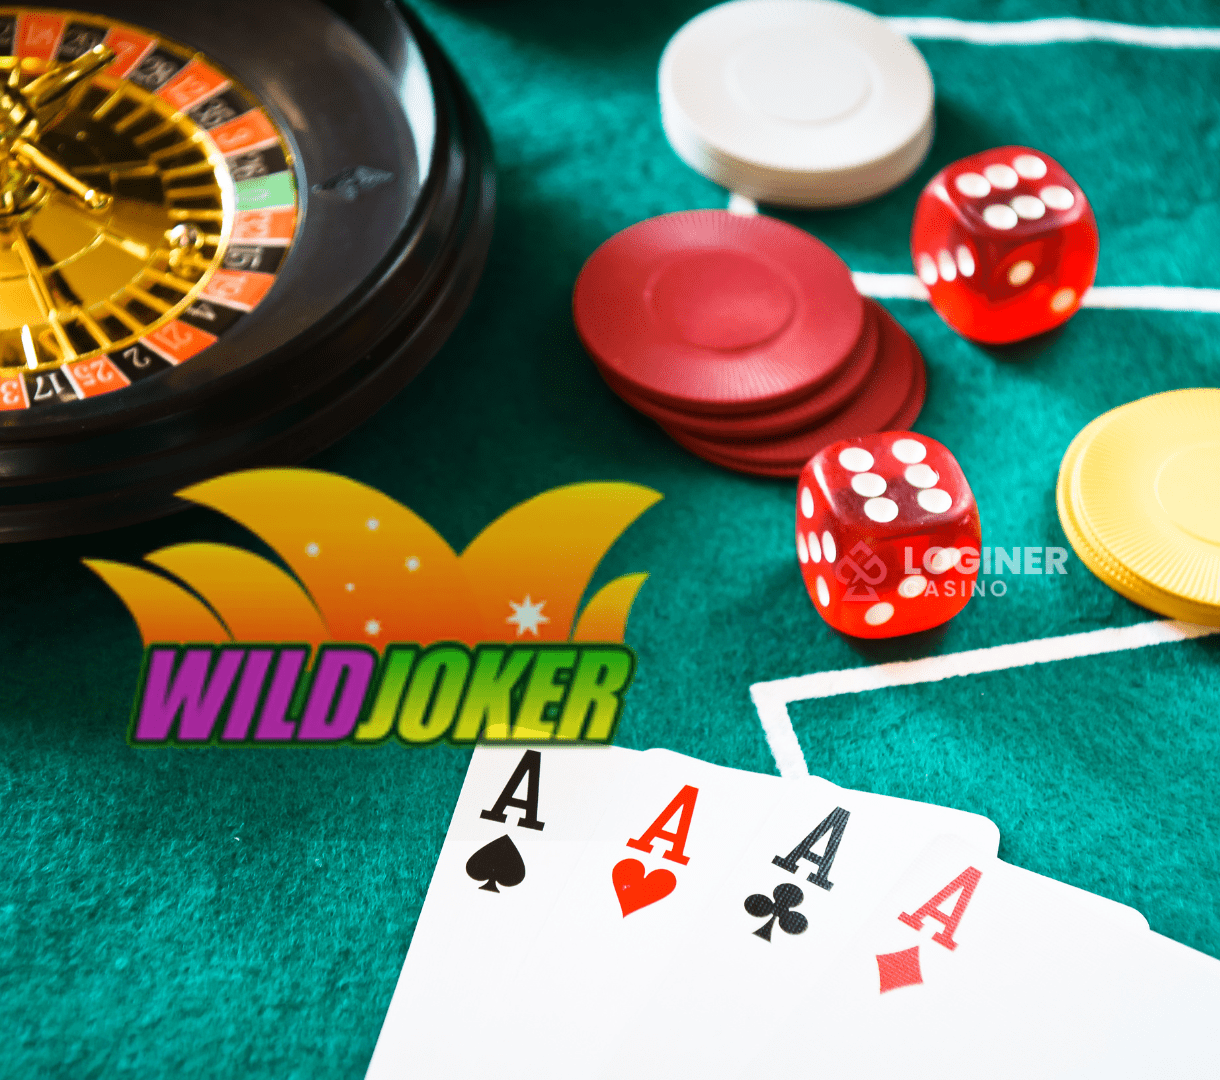 What are the benefits of playing at Wild Joker Casino caribbean stud poker?